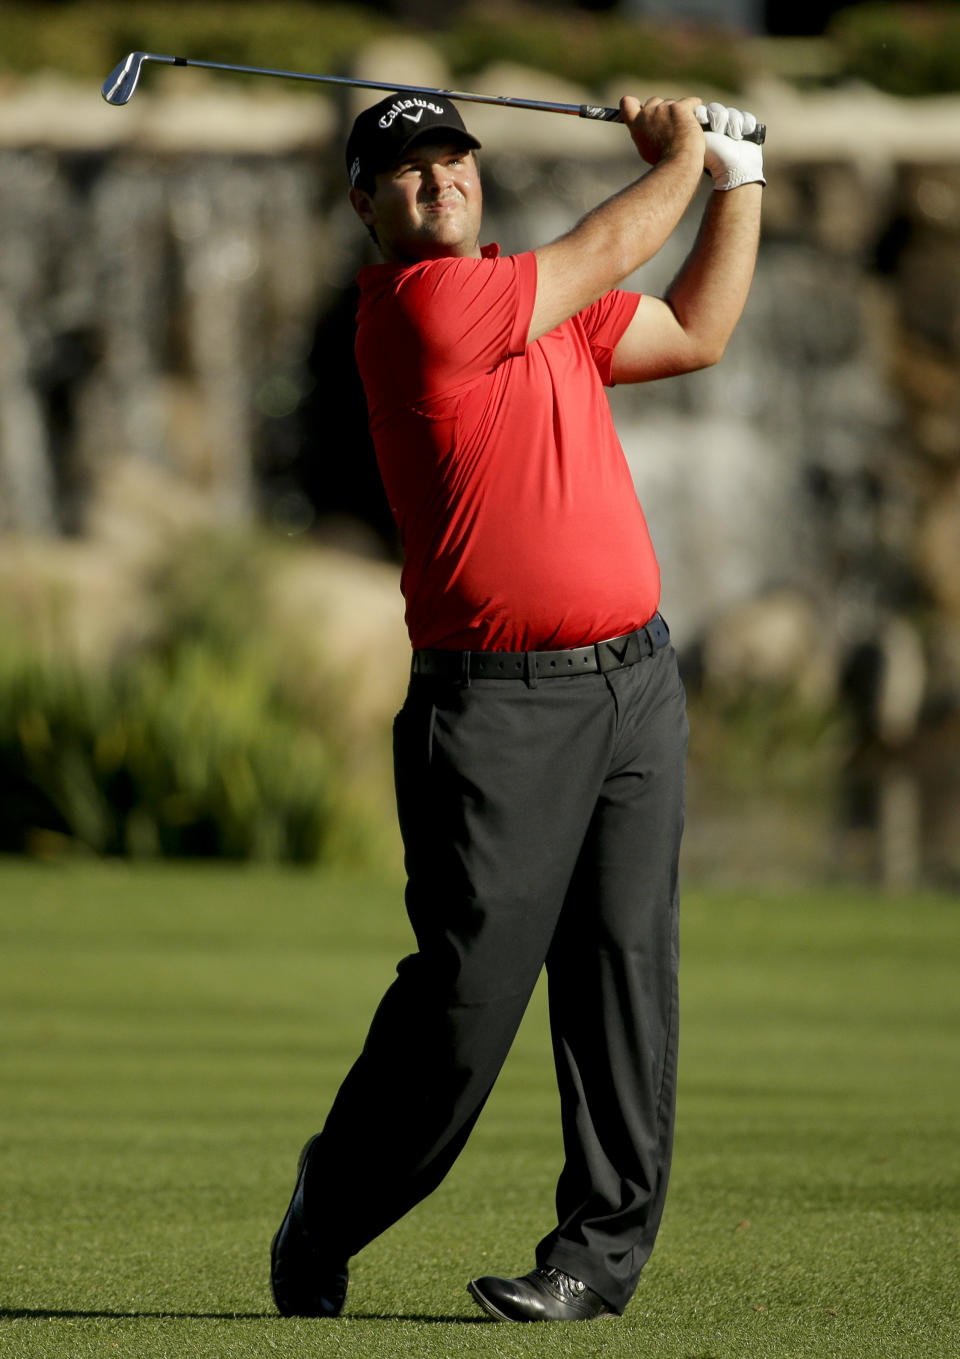 Patrick Reed watches his shot to the 18th green during the second round of the Humana Challenge golf tournament at La Quinta Country Club on Friday, Jan. 17, 2014, in La Quinta, Calif. (AP Photo/Chris Carlson)